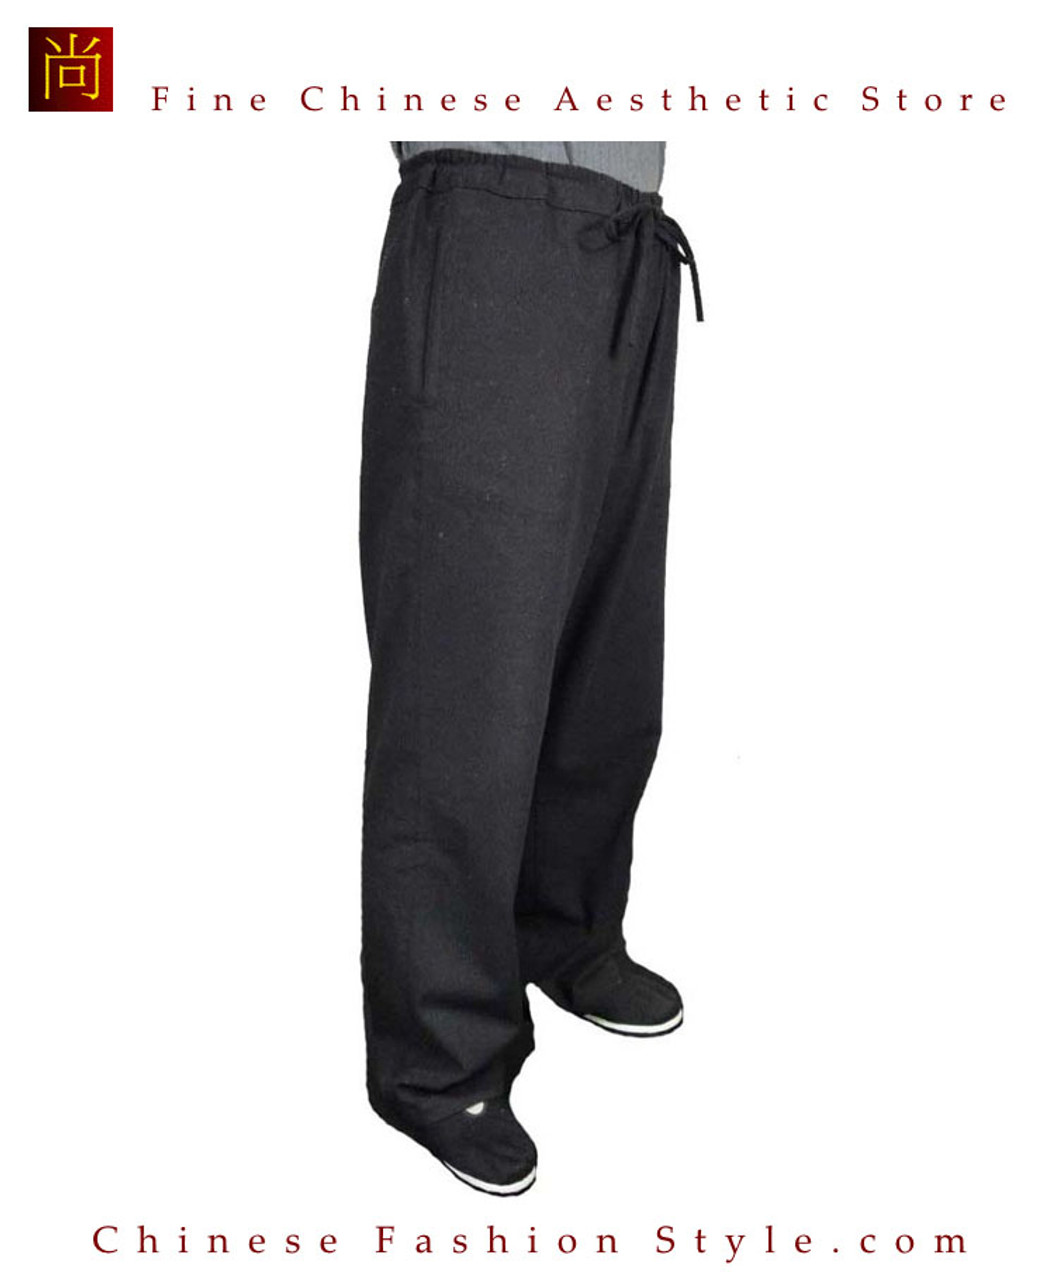 Custom Tailored Mens Dress Pants 39x29 Solid Gray Wool Flat Front Trousers  | eBay